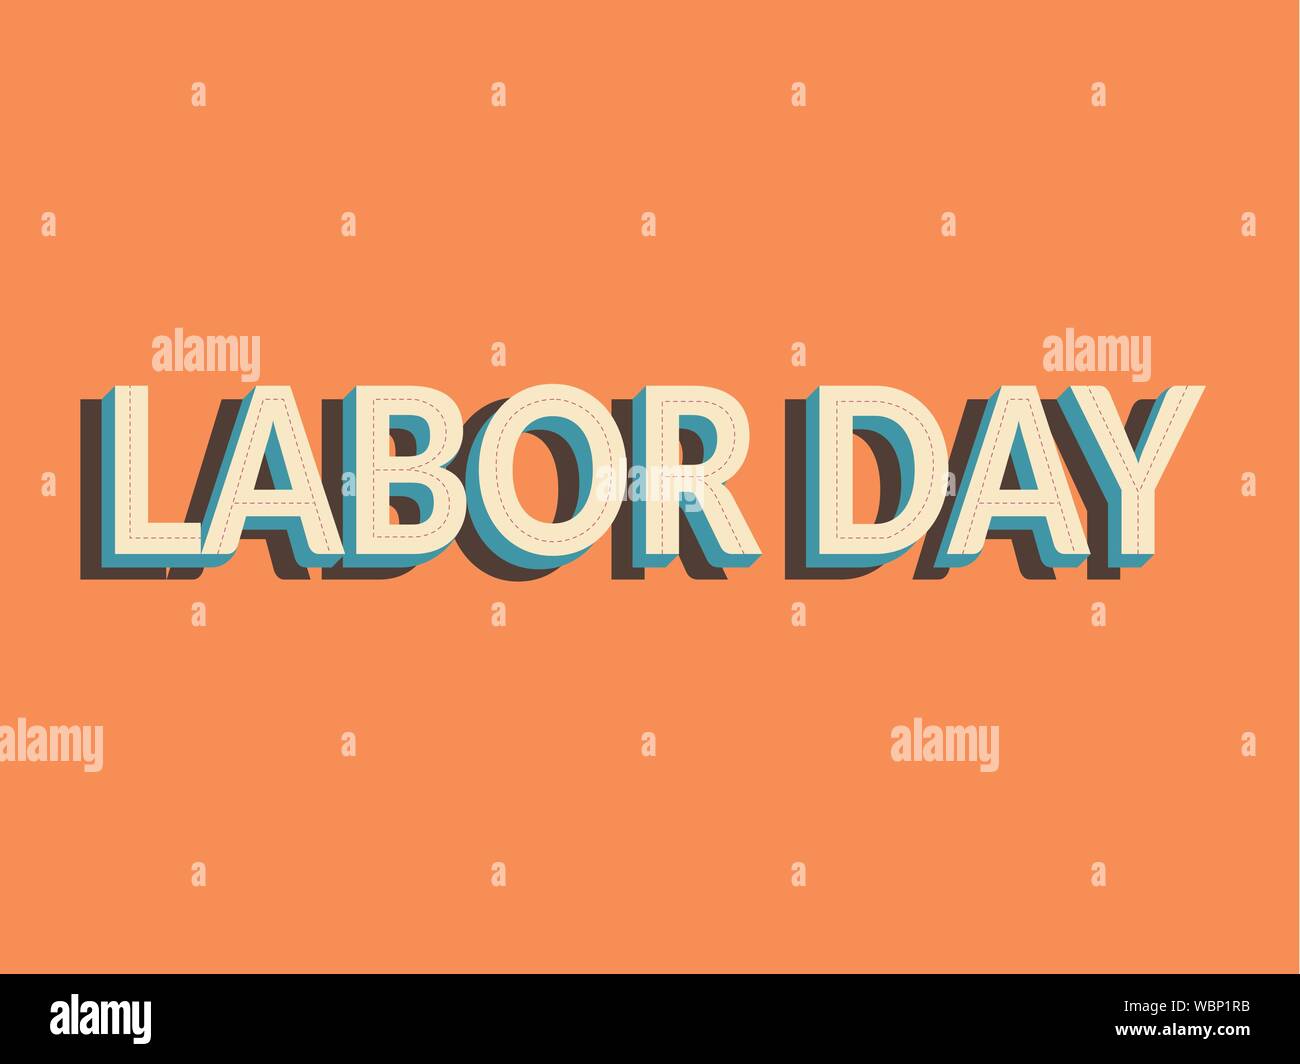 labor day simple vector design. text labor day with shadow isolated on vintage orange color, old school style Stock Vector